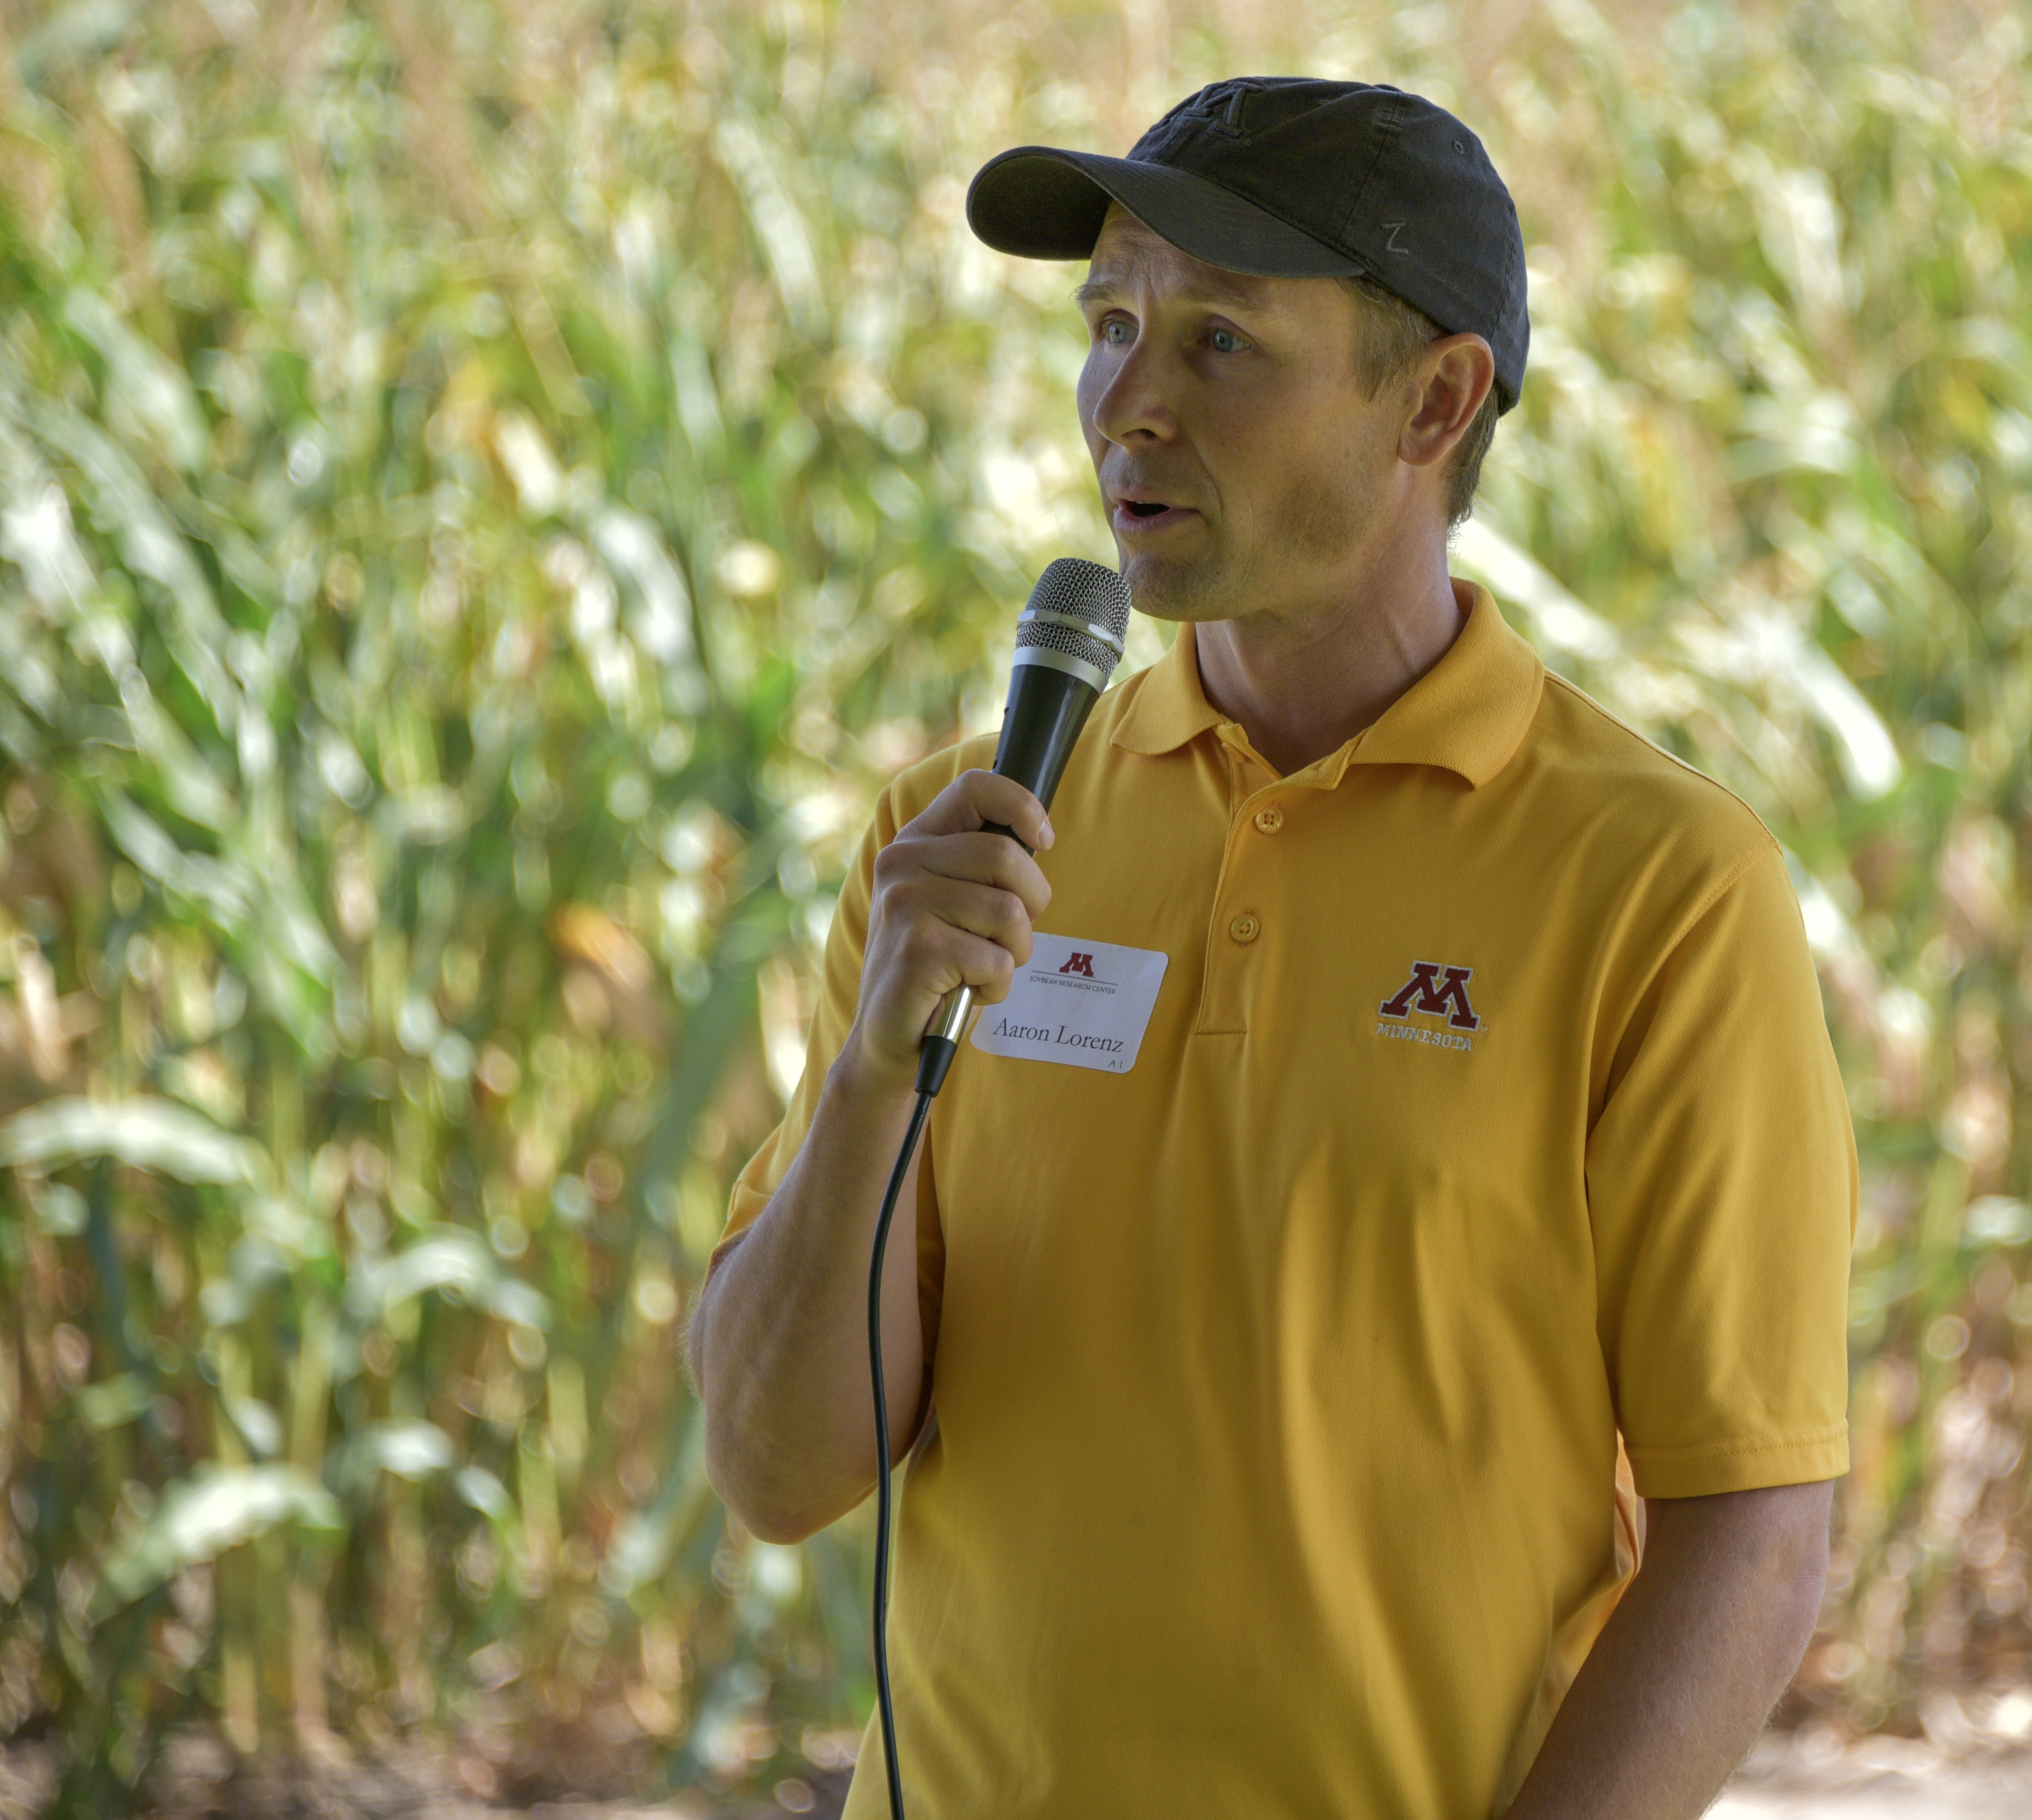 Aaron Lorenz, in a yellow shirt and baseball cap, speaks to the attendees in front of a field. 